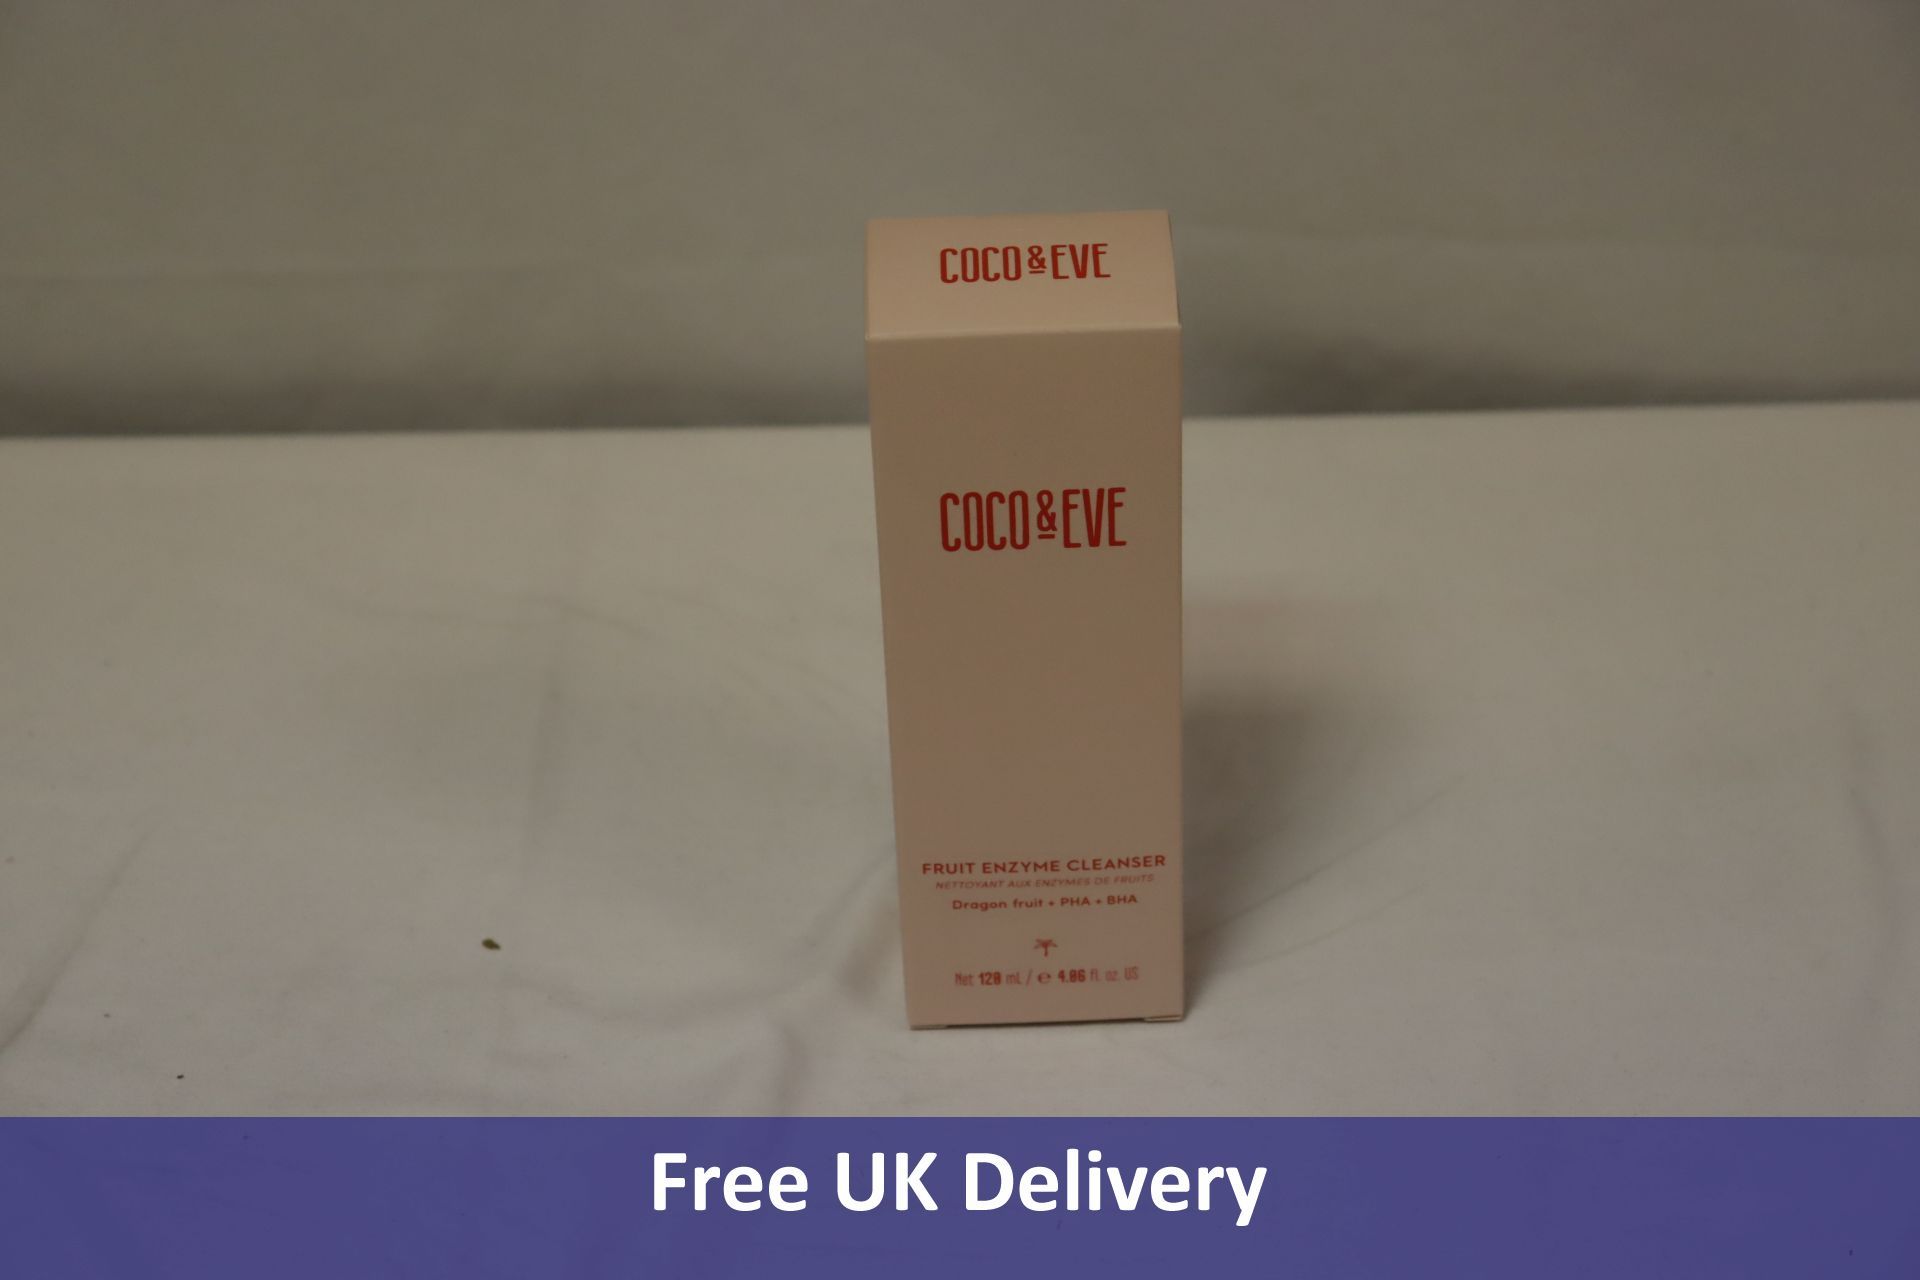 Three Coco and Eve Fruit Enzyme Cleanser